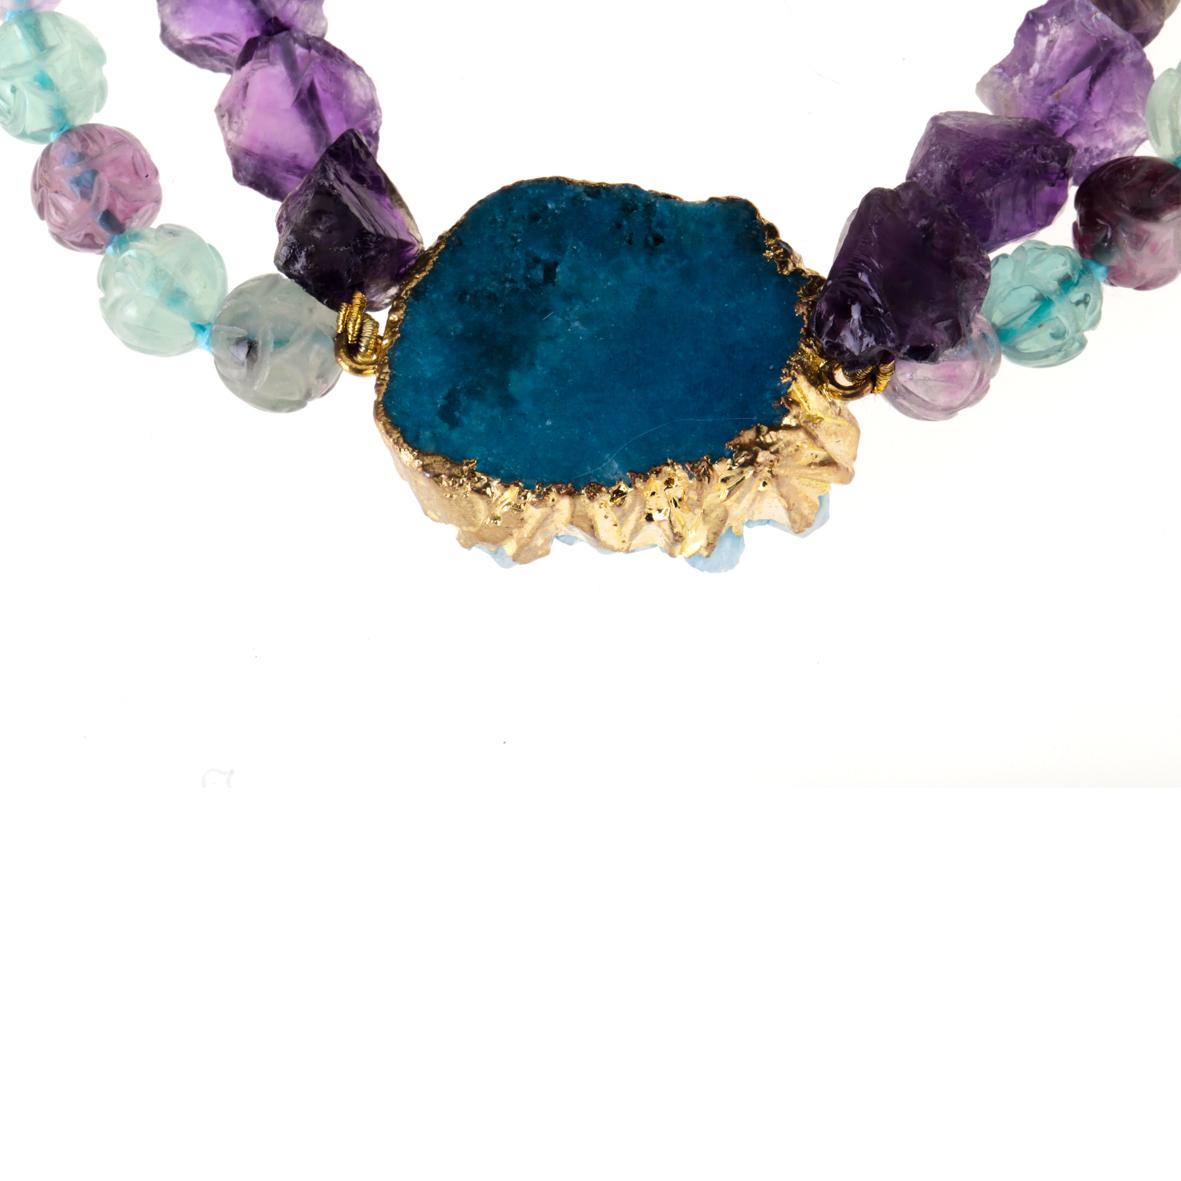 Druzy Agate Necklace Tourmaline Amethyst Gold-Plated For Sale 1